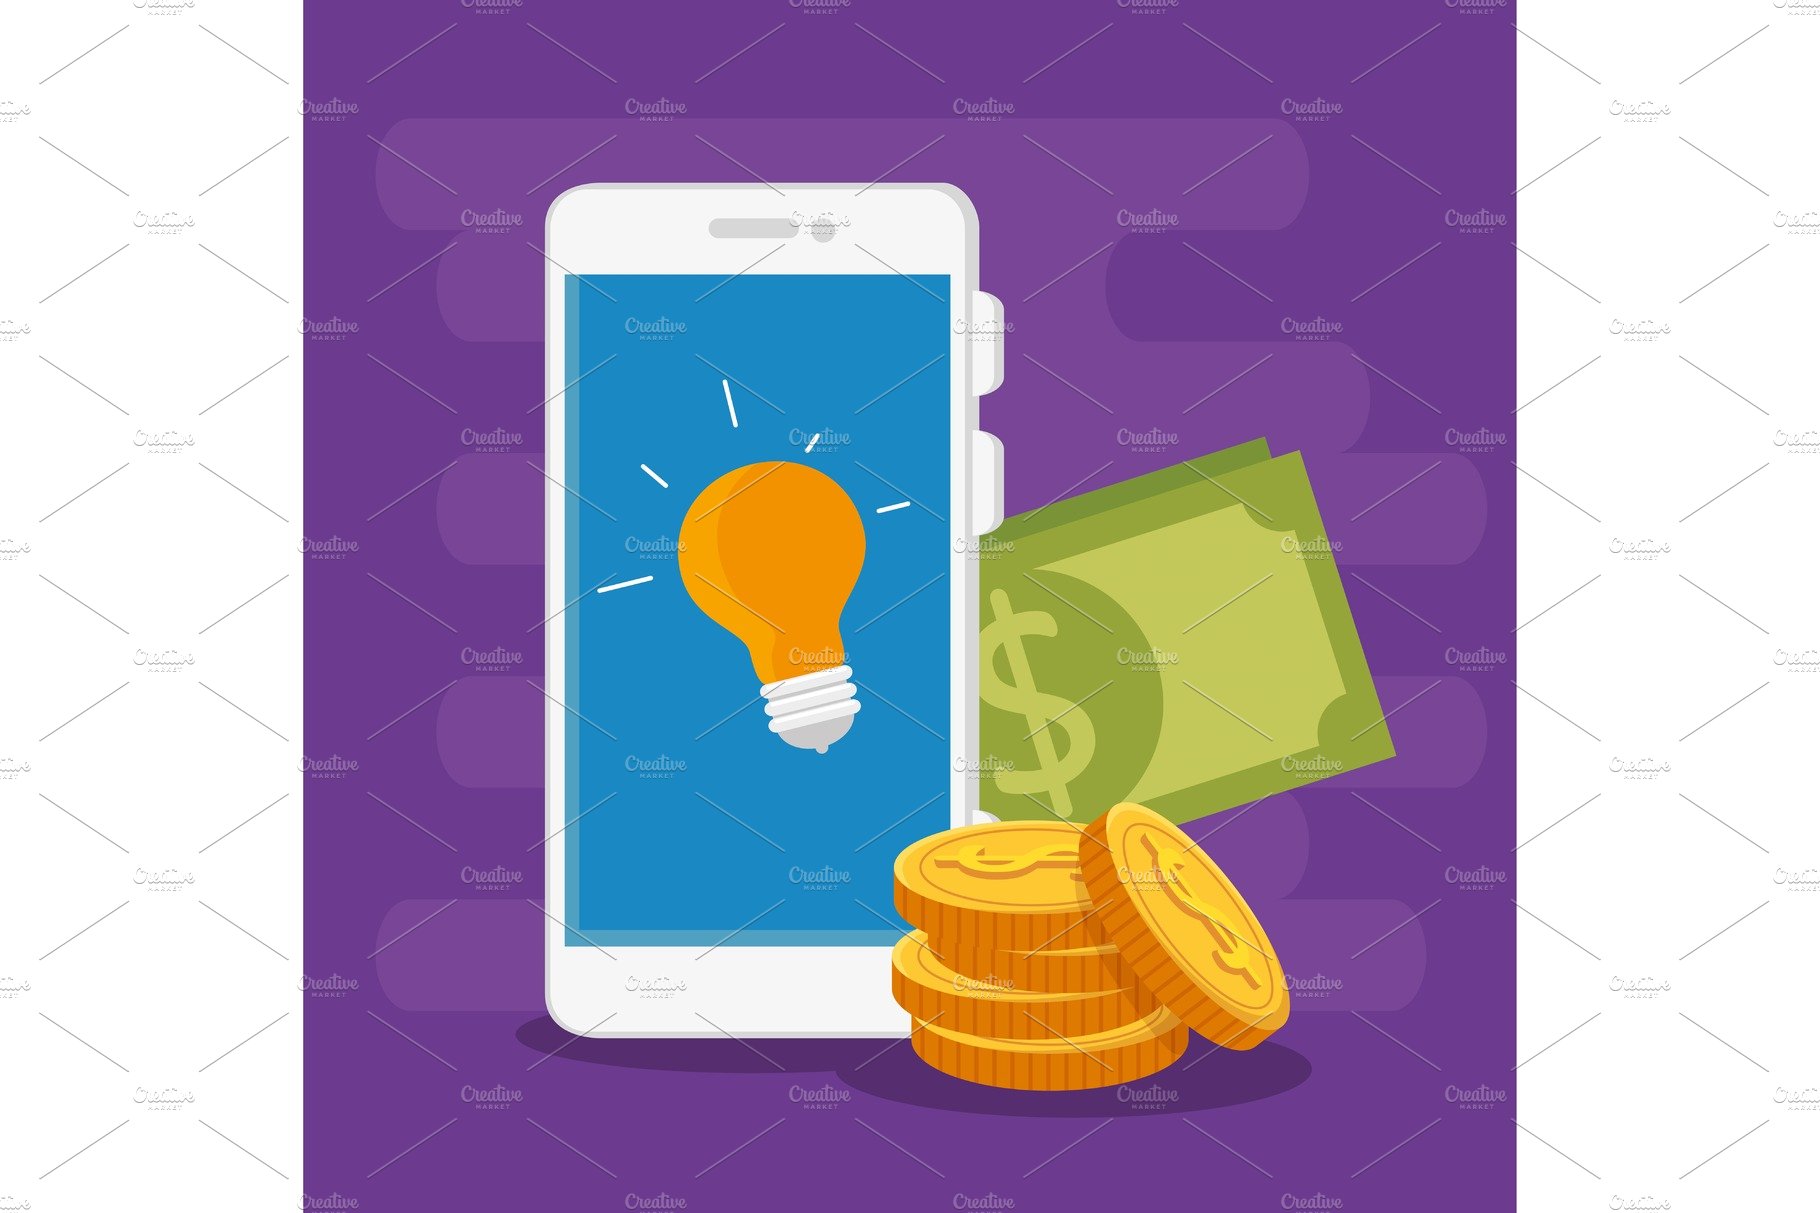 A smart phone with a light bulb and a stack of coins.